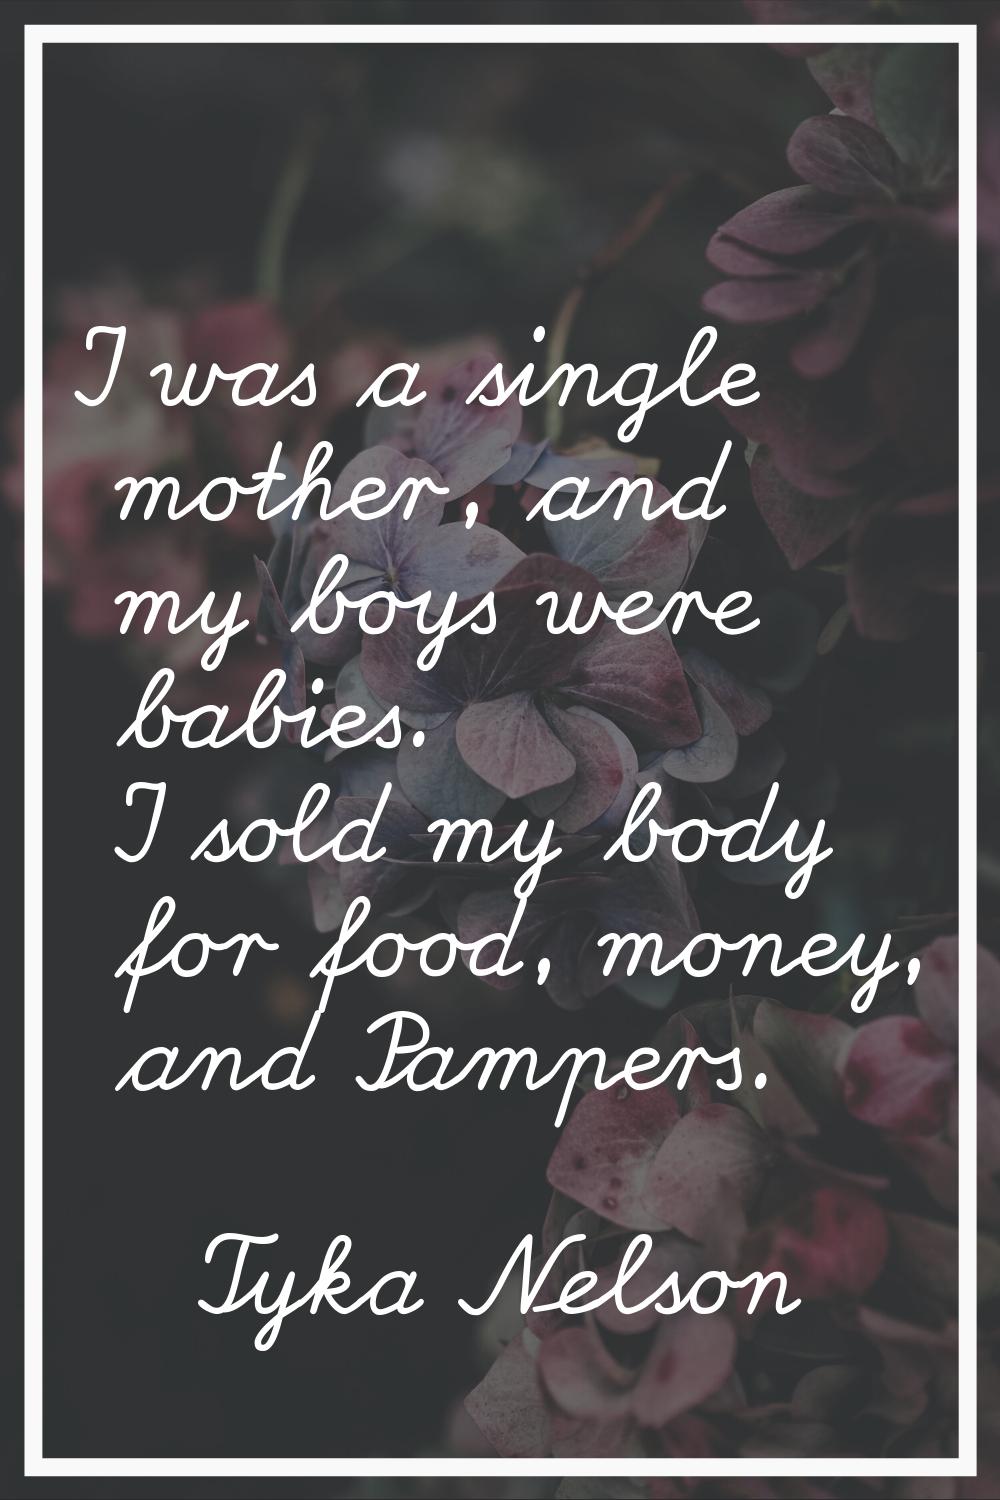 I was a single mother, and my boys were babies. I sold my body for food, money, and Pampers.